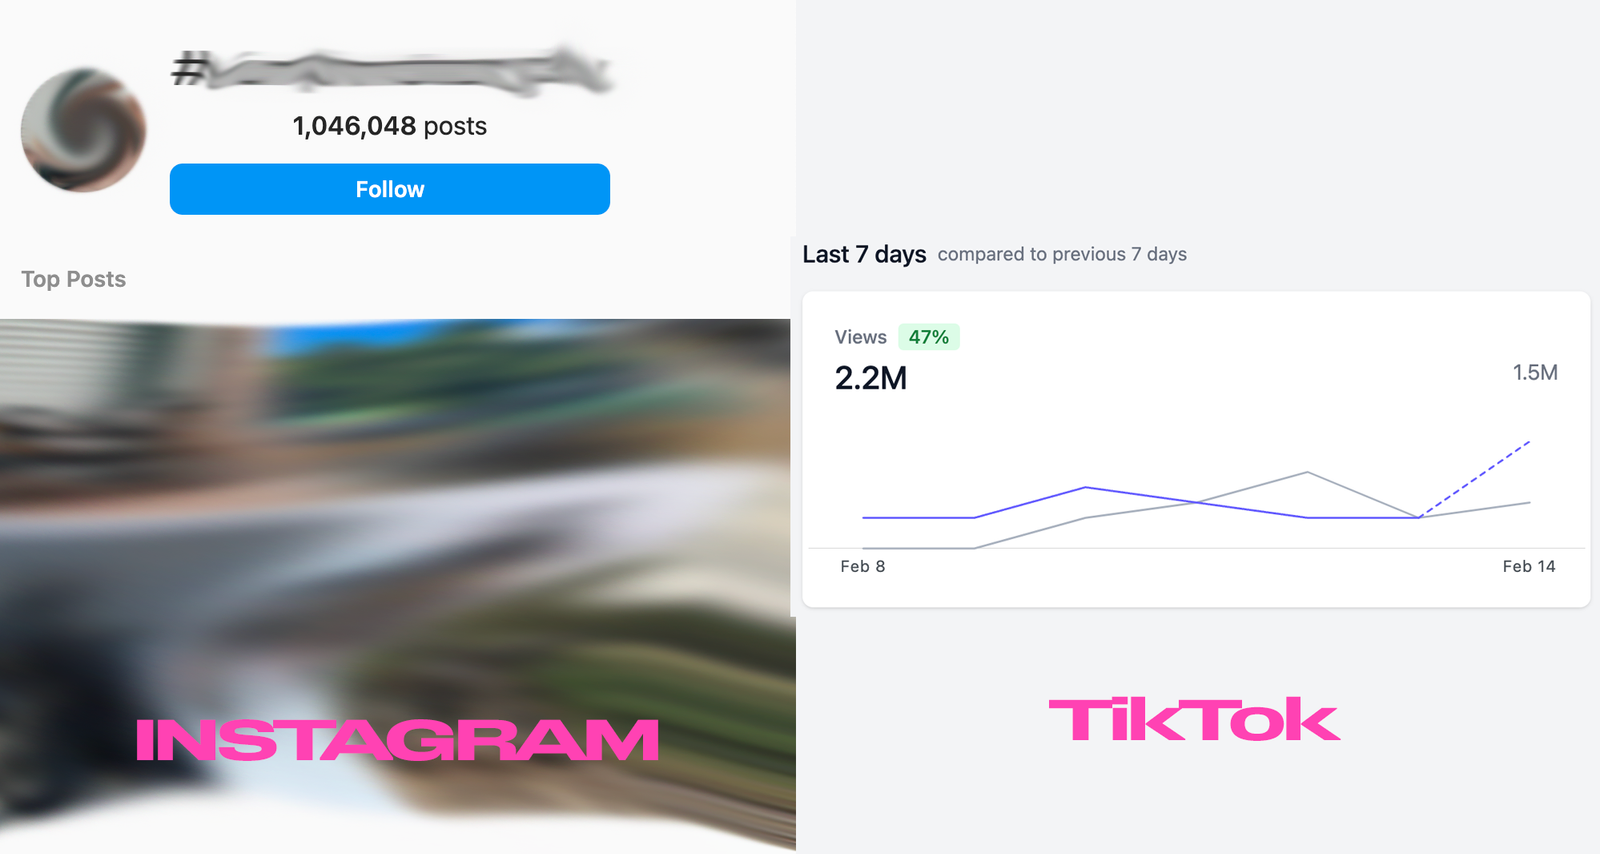 Comparison of audience sizes between Instagram and TikTok